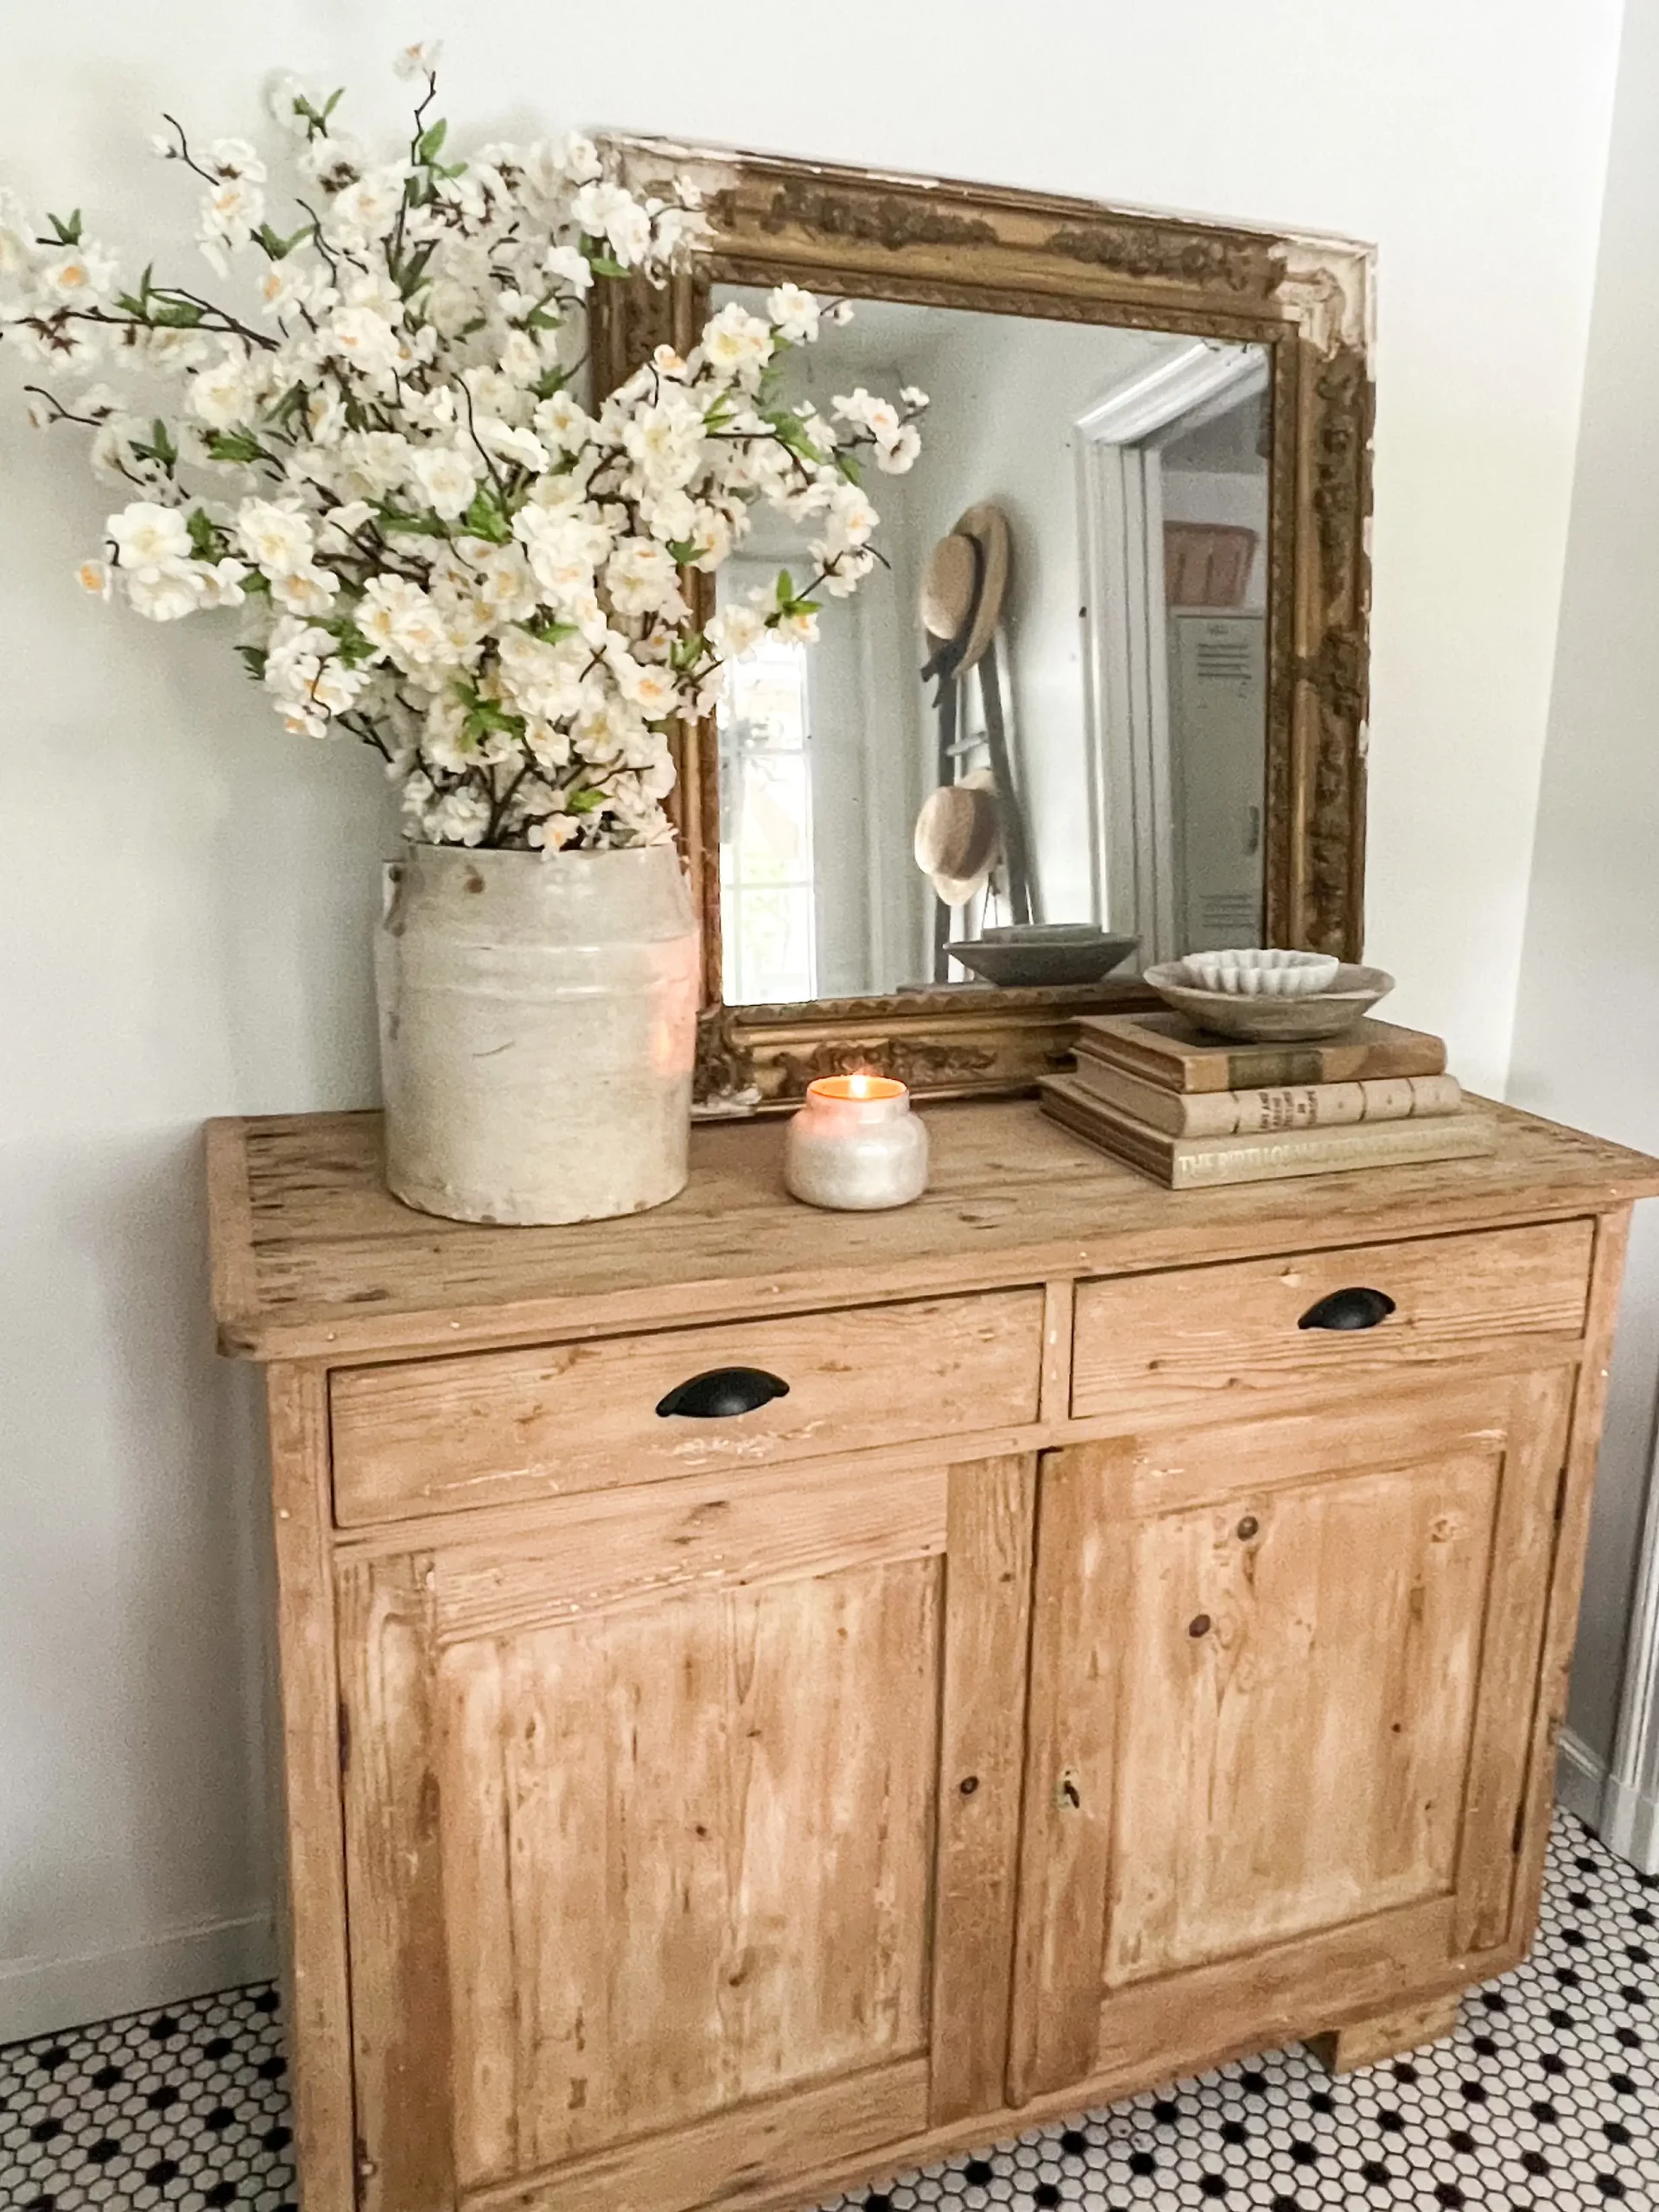 wooden console table styled with cherry blossoms, a large mirror, a small stack of vintage books and a small candle